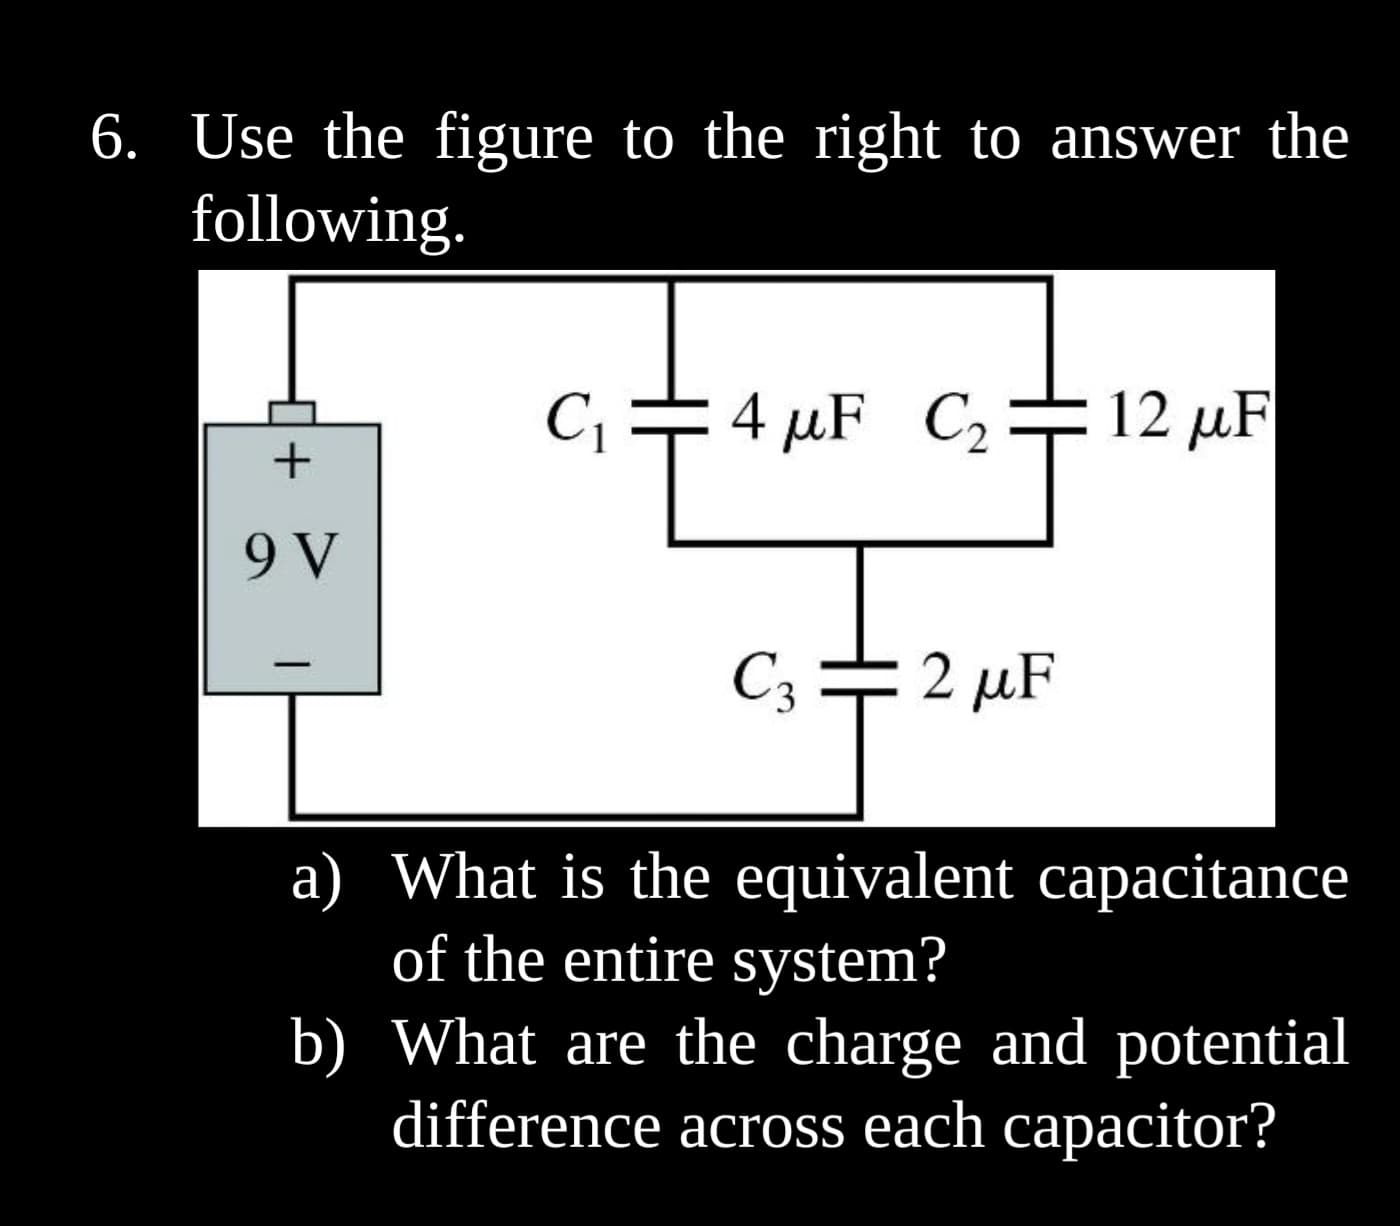 6. Use the figure to the right to answer the
following.
+
9 V
|
C₁
4 μF C₂
I
C3:
12 μF
T
2 μF
a) What is the equivalent capacitance
of the entire system?
b)
What are the charge and potential
difference across each capacitor?